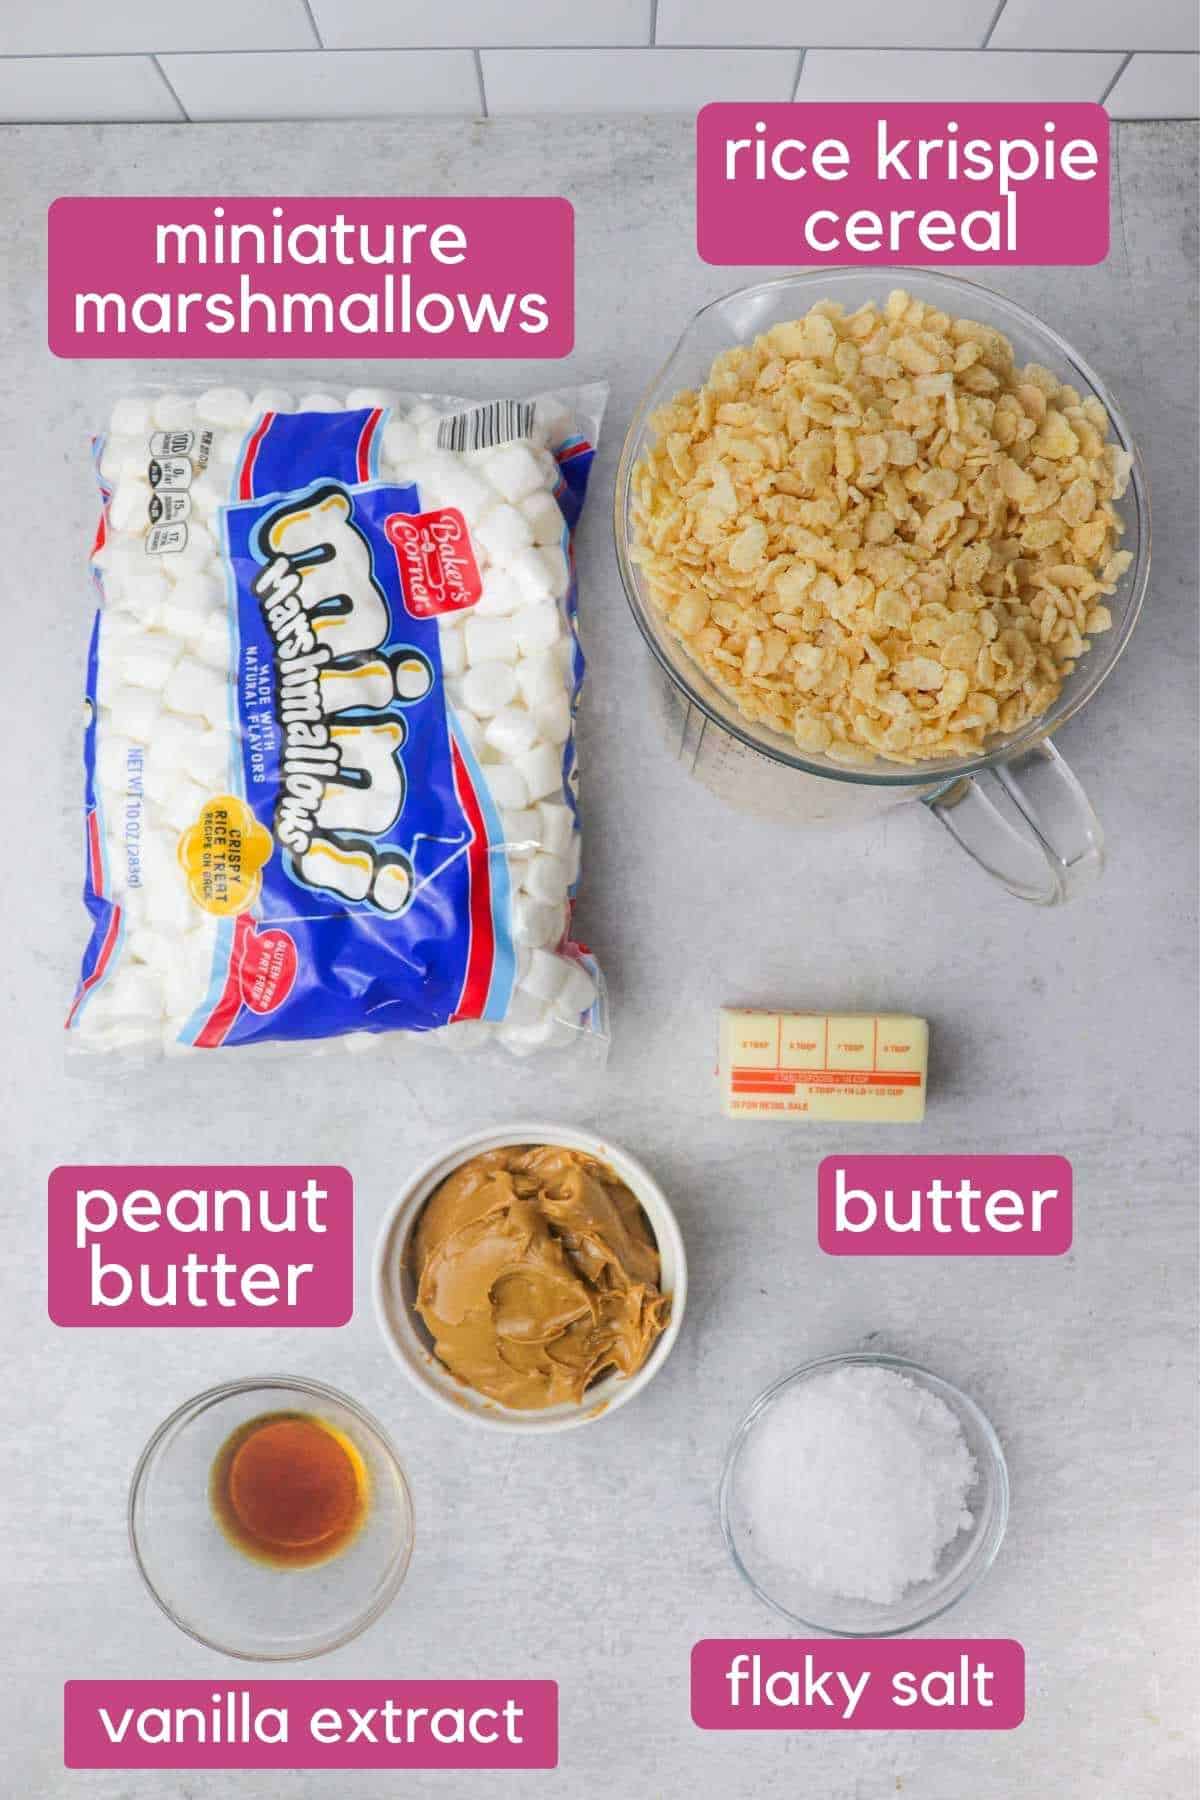 The ingredients needed to make peanut butter rice krispie treats, including marshmallows, peanut butter, and rice cereal.